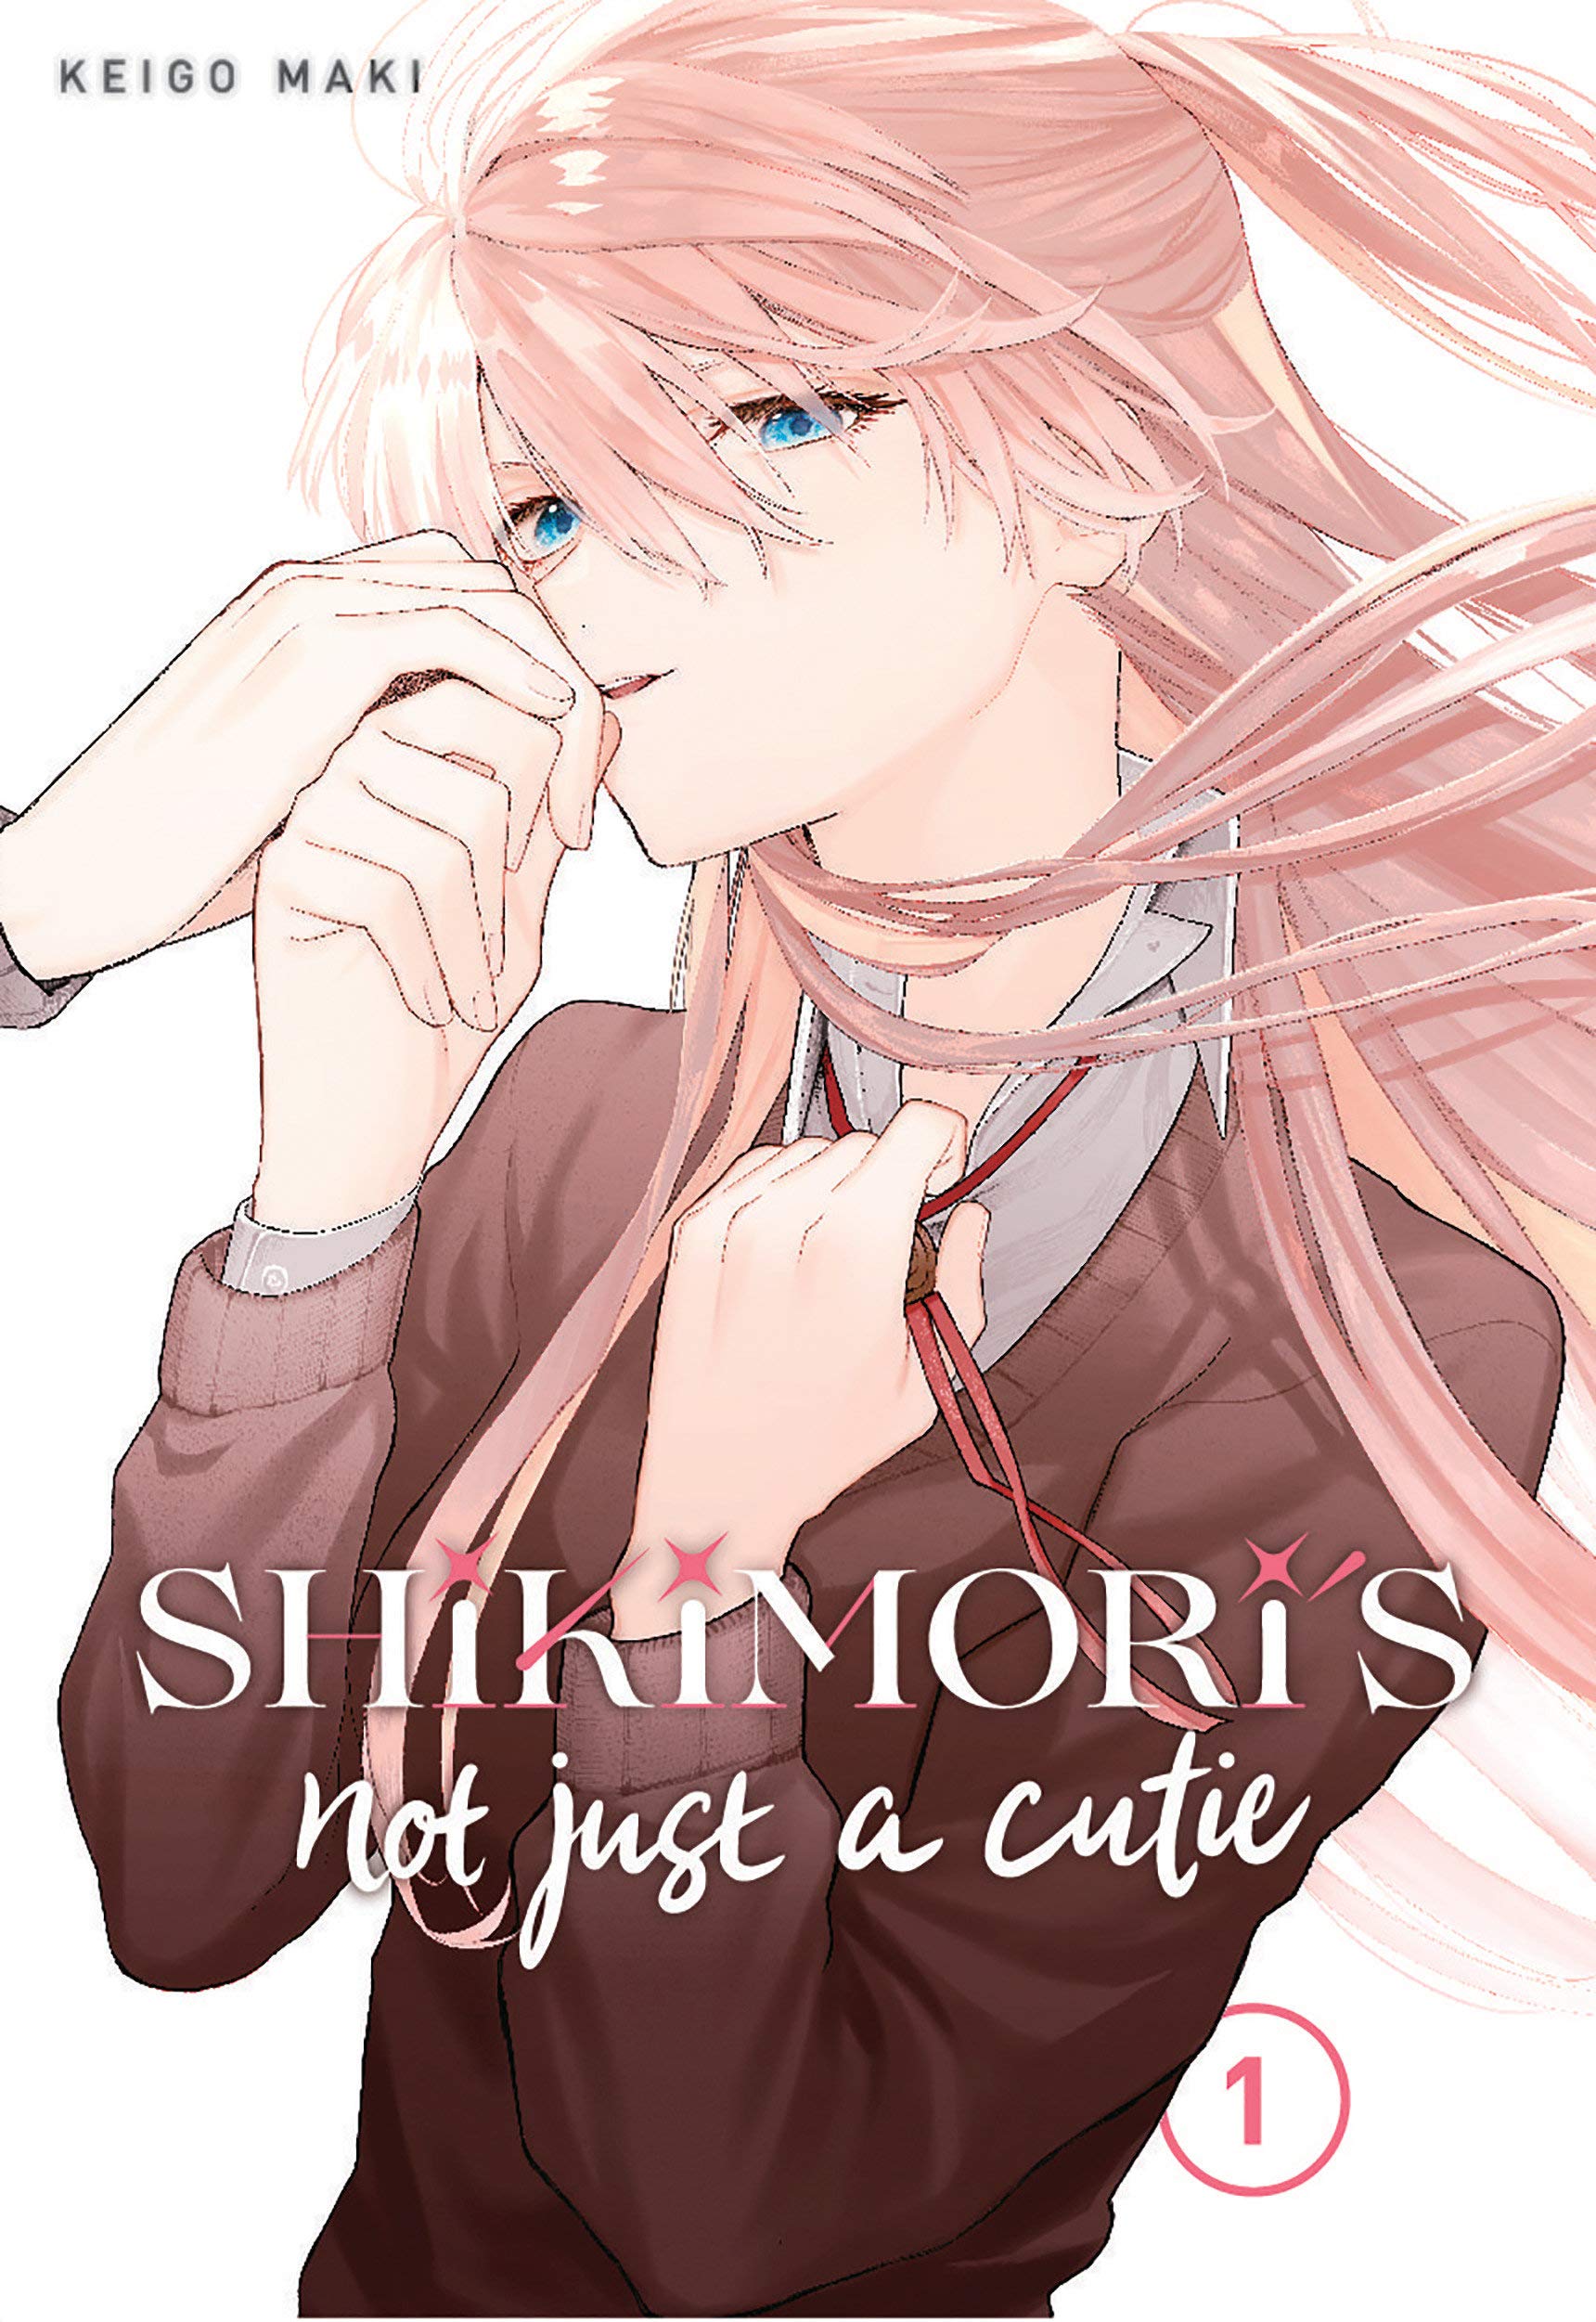 The cover of Volume 01 of the Shikimori's Not Just a Cutie manga by Keigo Maki, as published in the United States by Kodansha. The cover depicts Shikimori kissing her boyfriend's hand while loosening the necktie of her school uniform as if she's preparing for action. 